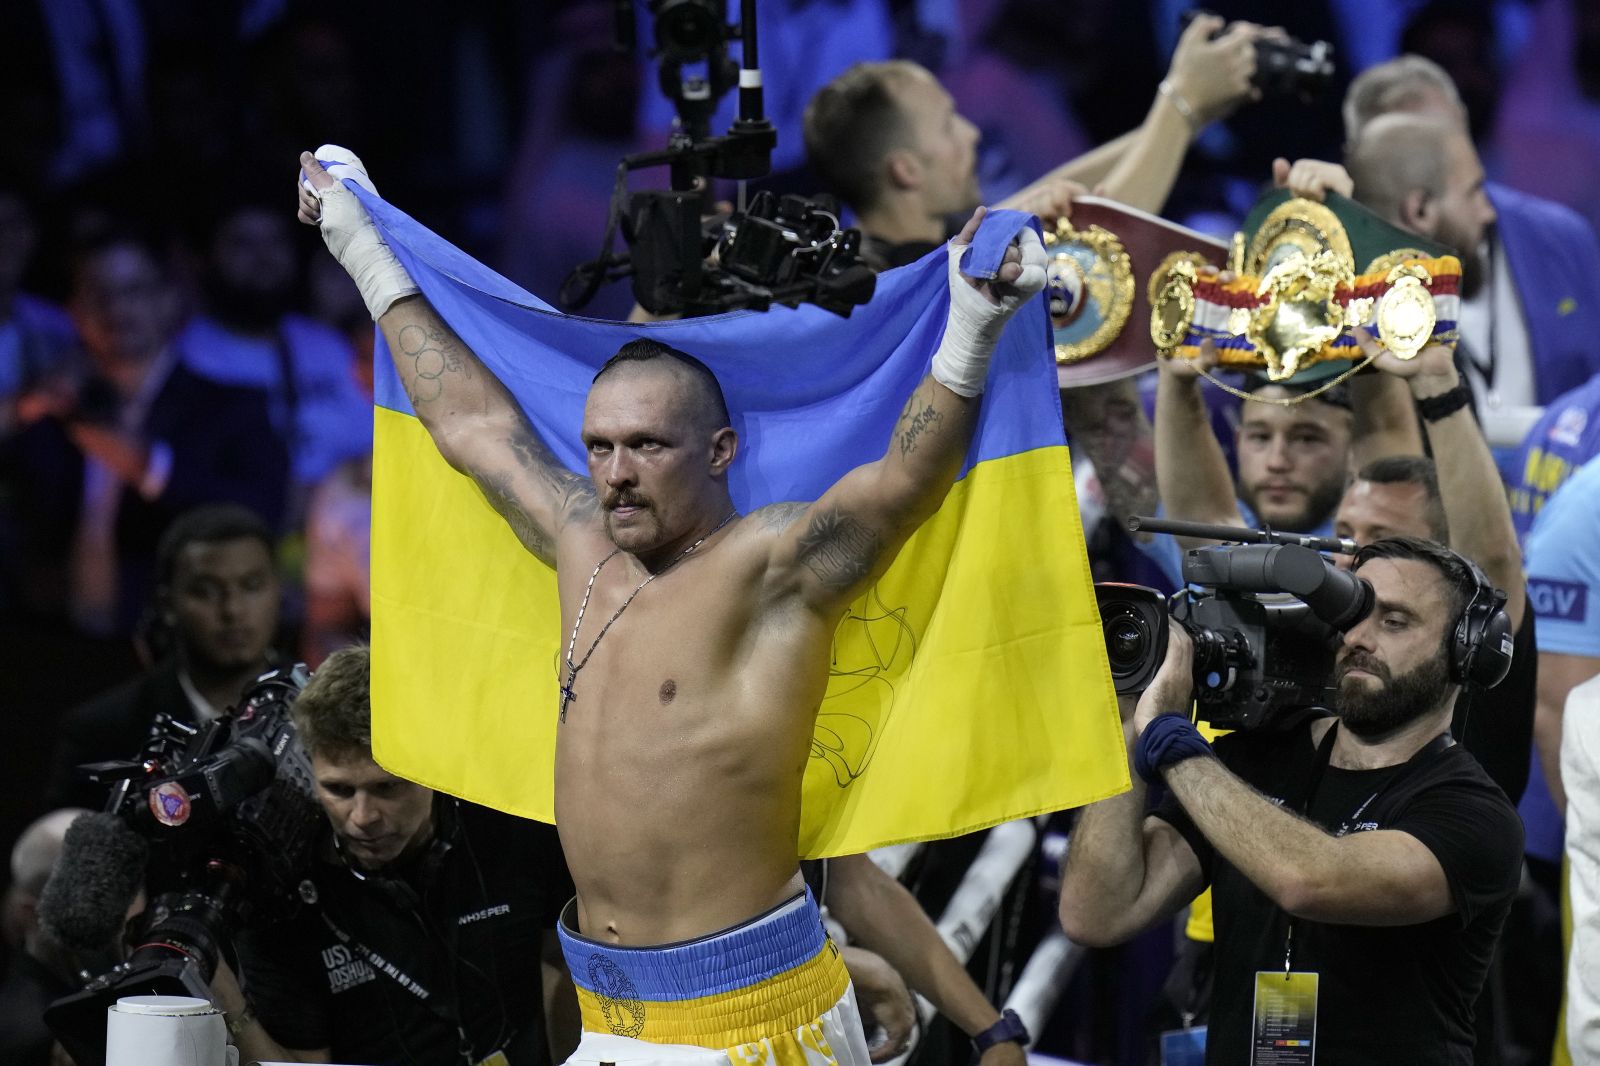 FILE - Ukraine's Oleksandr Usyk celebrates after beating Britain's Anthony Joshua to retain his world heavyweight title at King Abdullah Sports City in Jeddah, Saudi Arabia, on Aug. 21, 2022. Tyson Fury will face Oleksandr Usyk in Saudi Arabia in the first fight this century to unify all of the four major heavyweight boxing titles, Fury's promoter Frank Warren said Friday, Sept. 29, 2023. (AP Photo/Hassan Ammar, File)